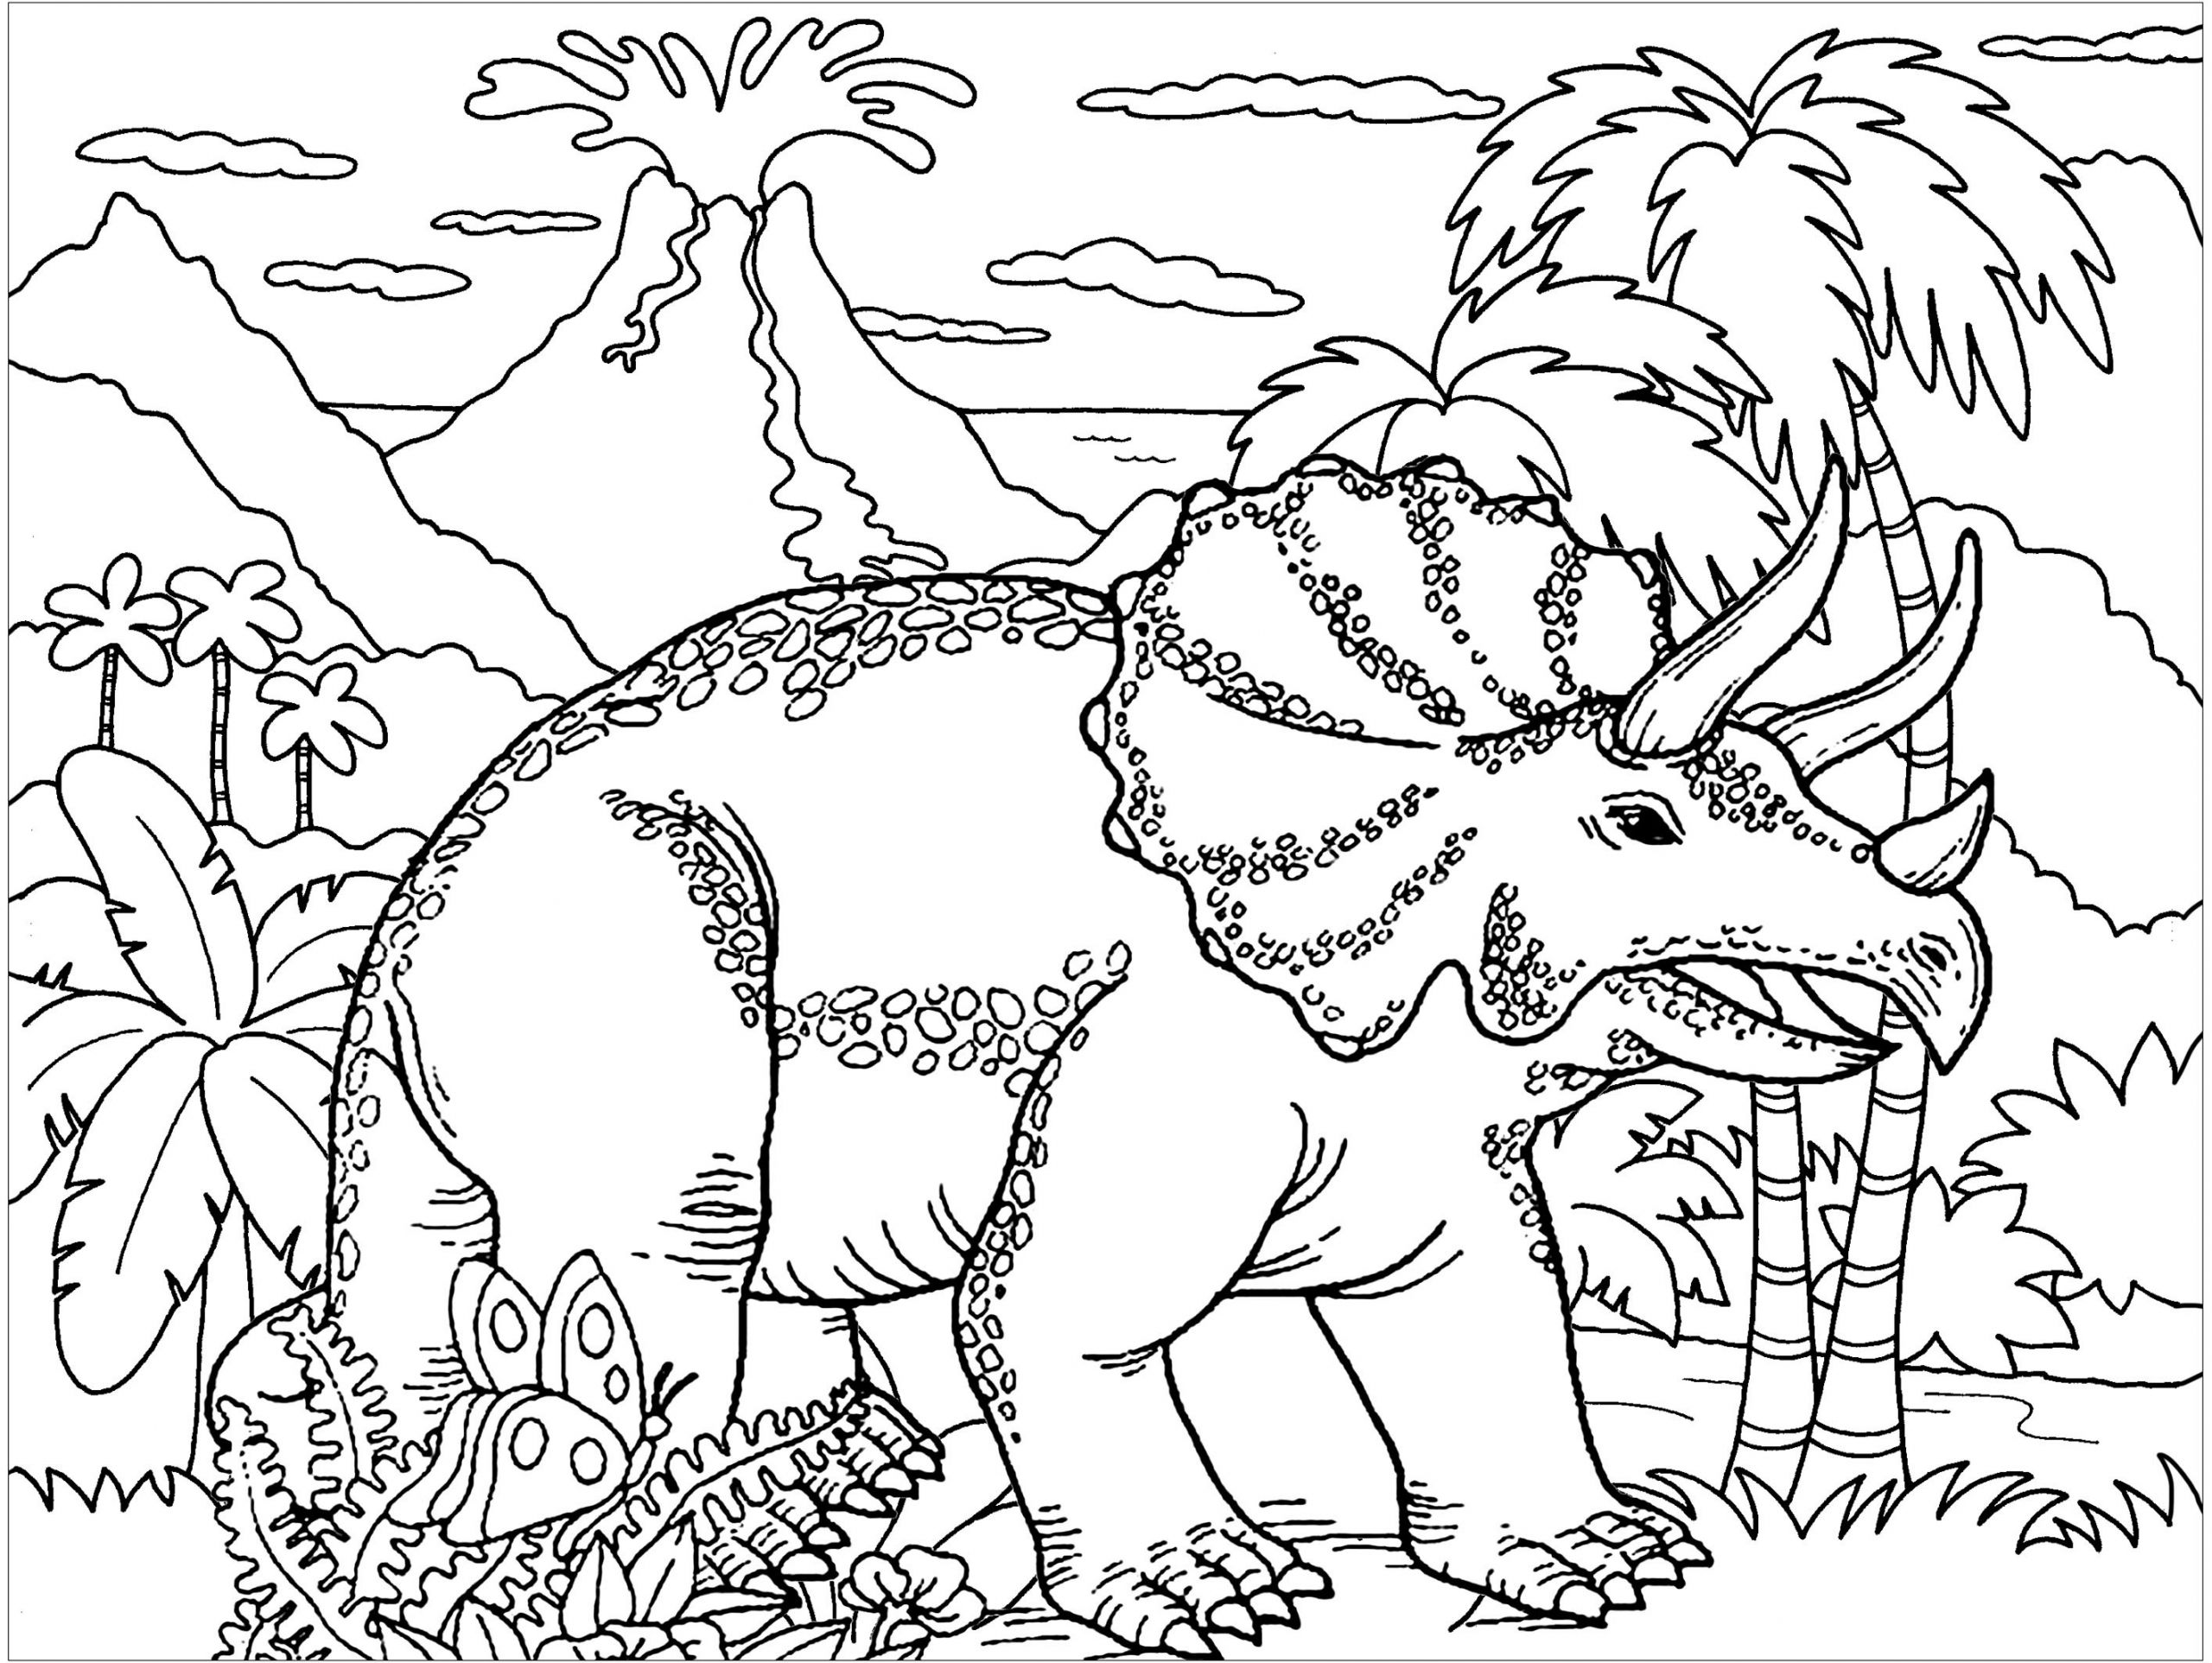 Dinosaur Coloring Pages For Adults
 Triceraptos Dinosaurs Adult Coloring Pages